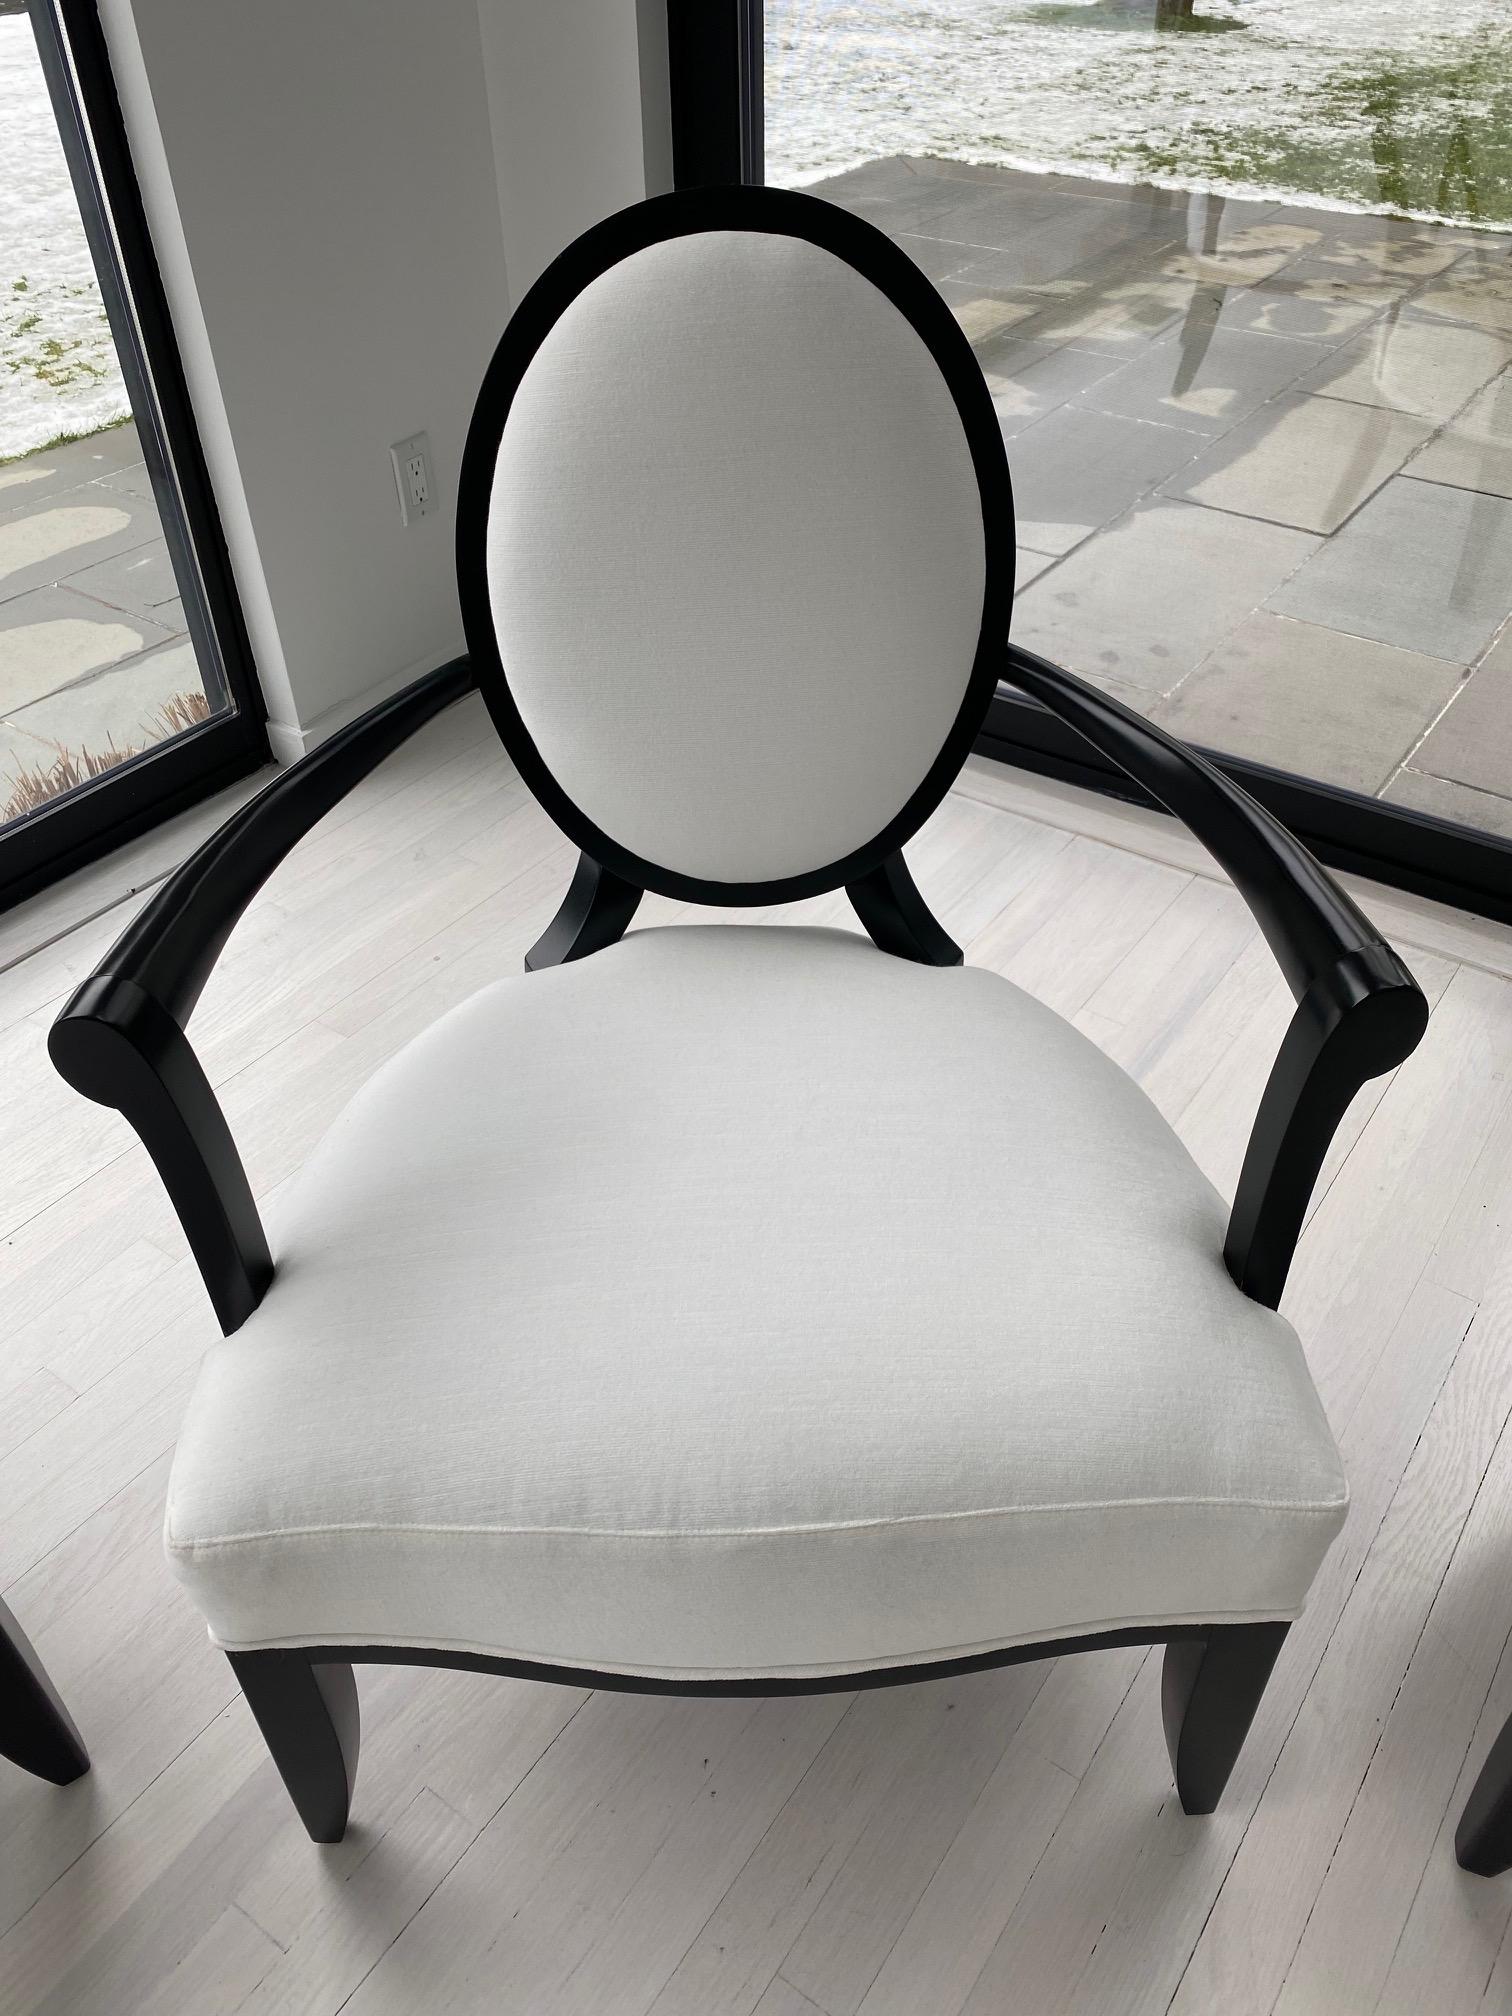 Barbara Barry for Baker Furniture Company Regency Style Oval X-Back Lounge Arm Chair
These beautiful and comfortable lounge chairs are in mint condition, recently reupholstered in white velvet which contrasts nicely against the black frames. Very